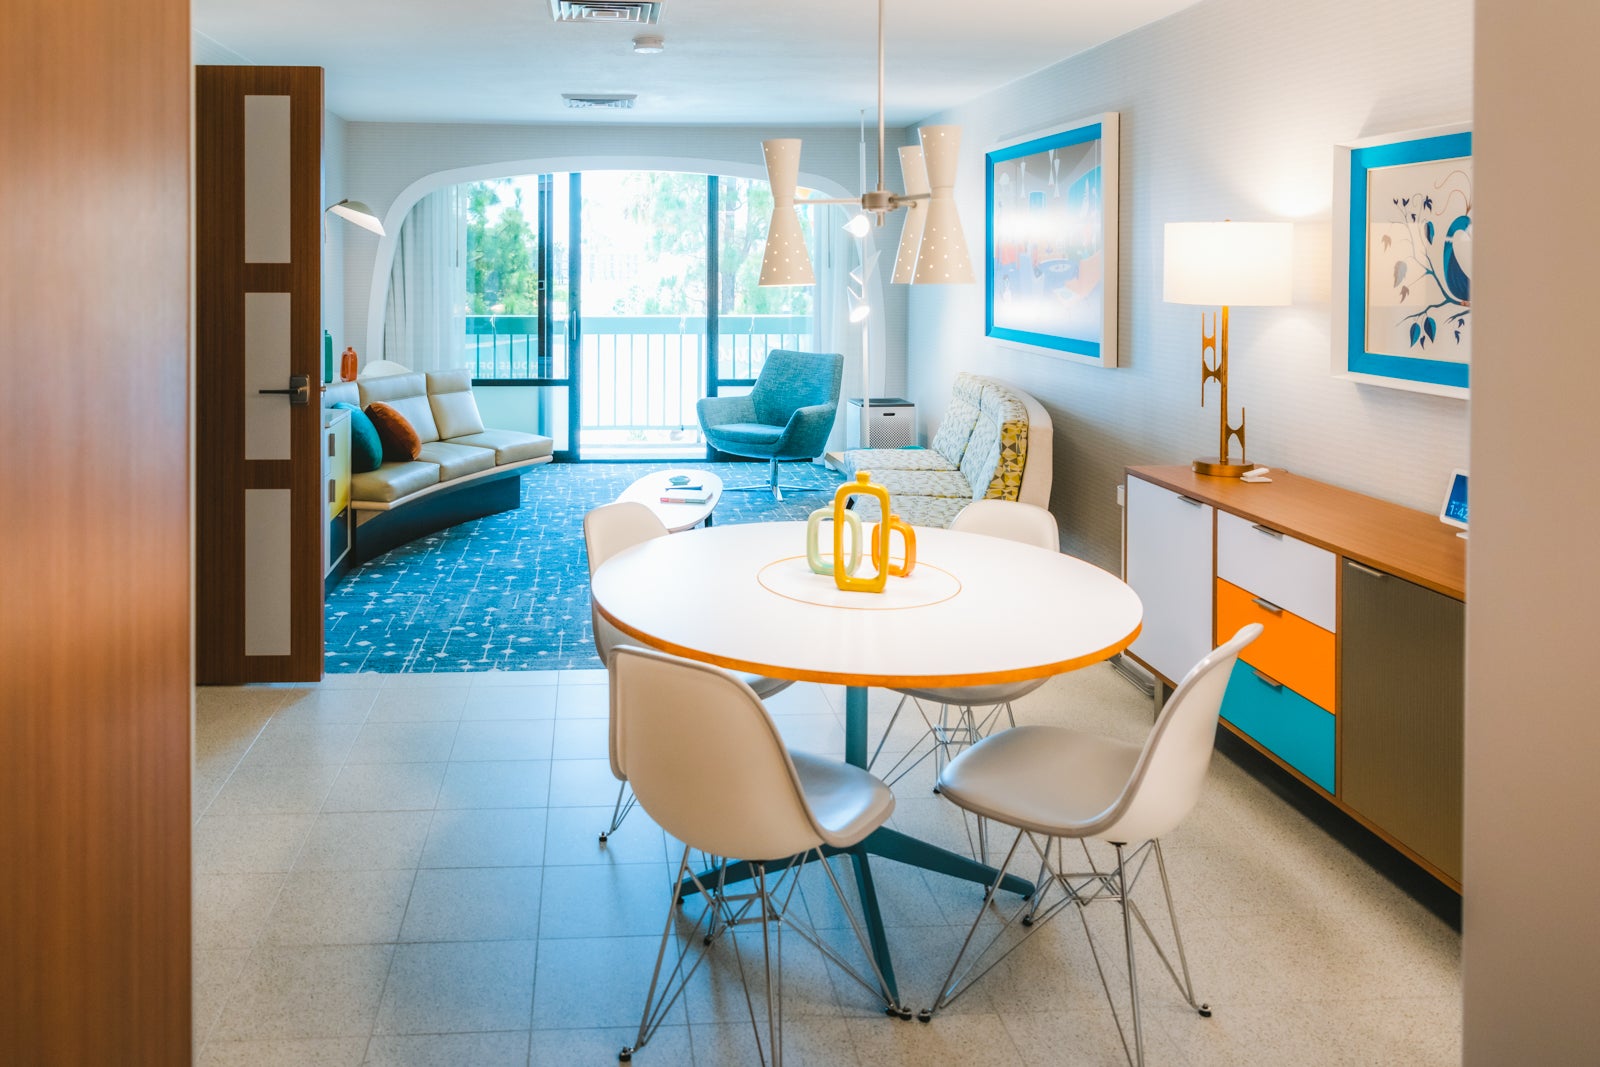 Howard Johnson Anaheim Opens Monsanto 'House of the Future'-Inspired Suite  - WDW News Today